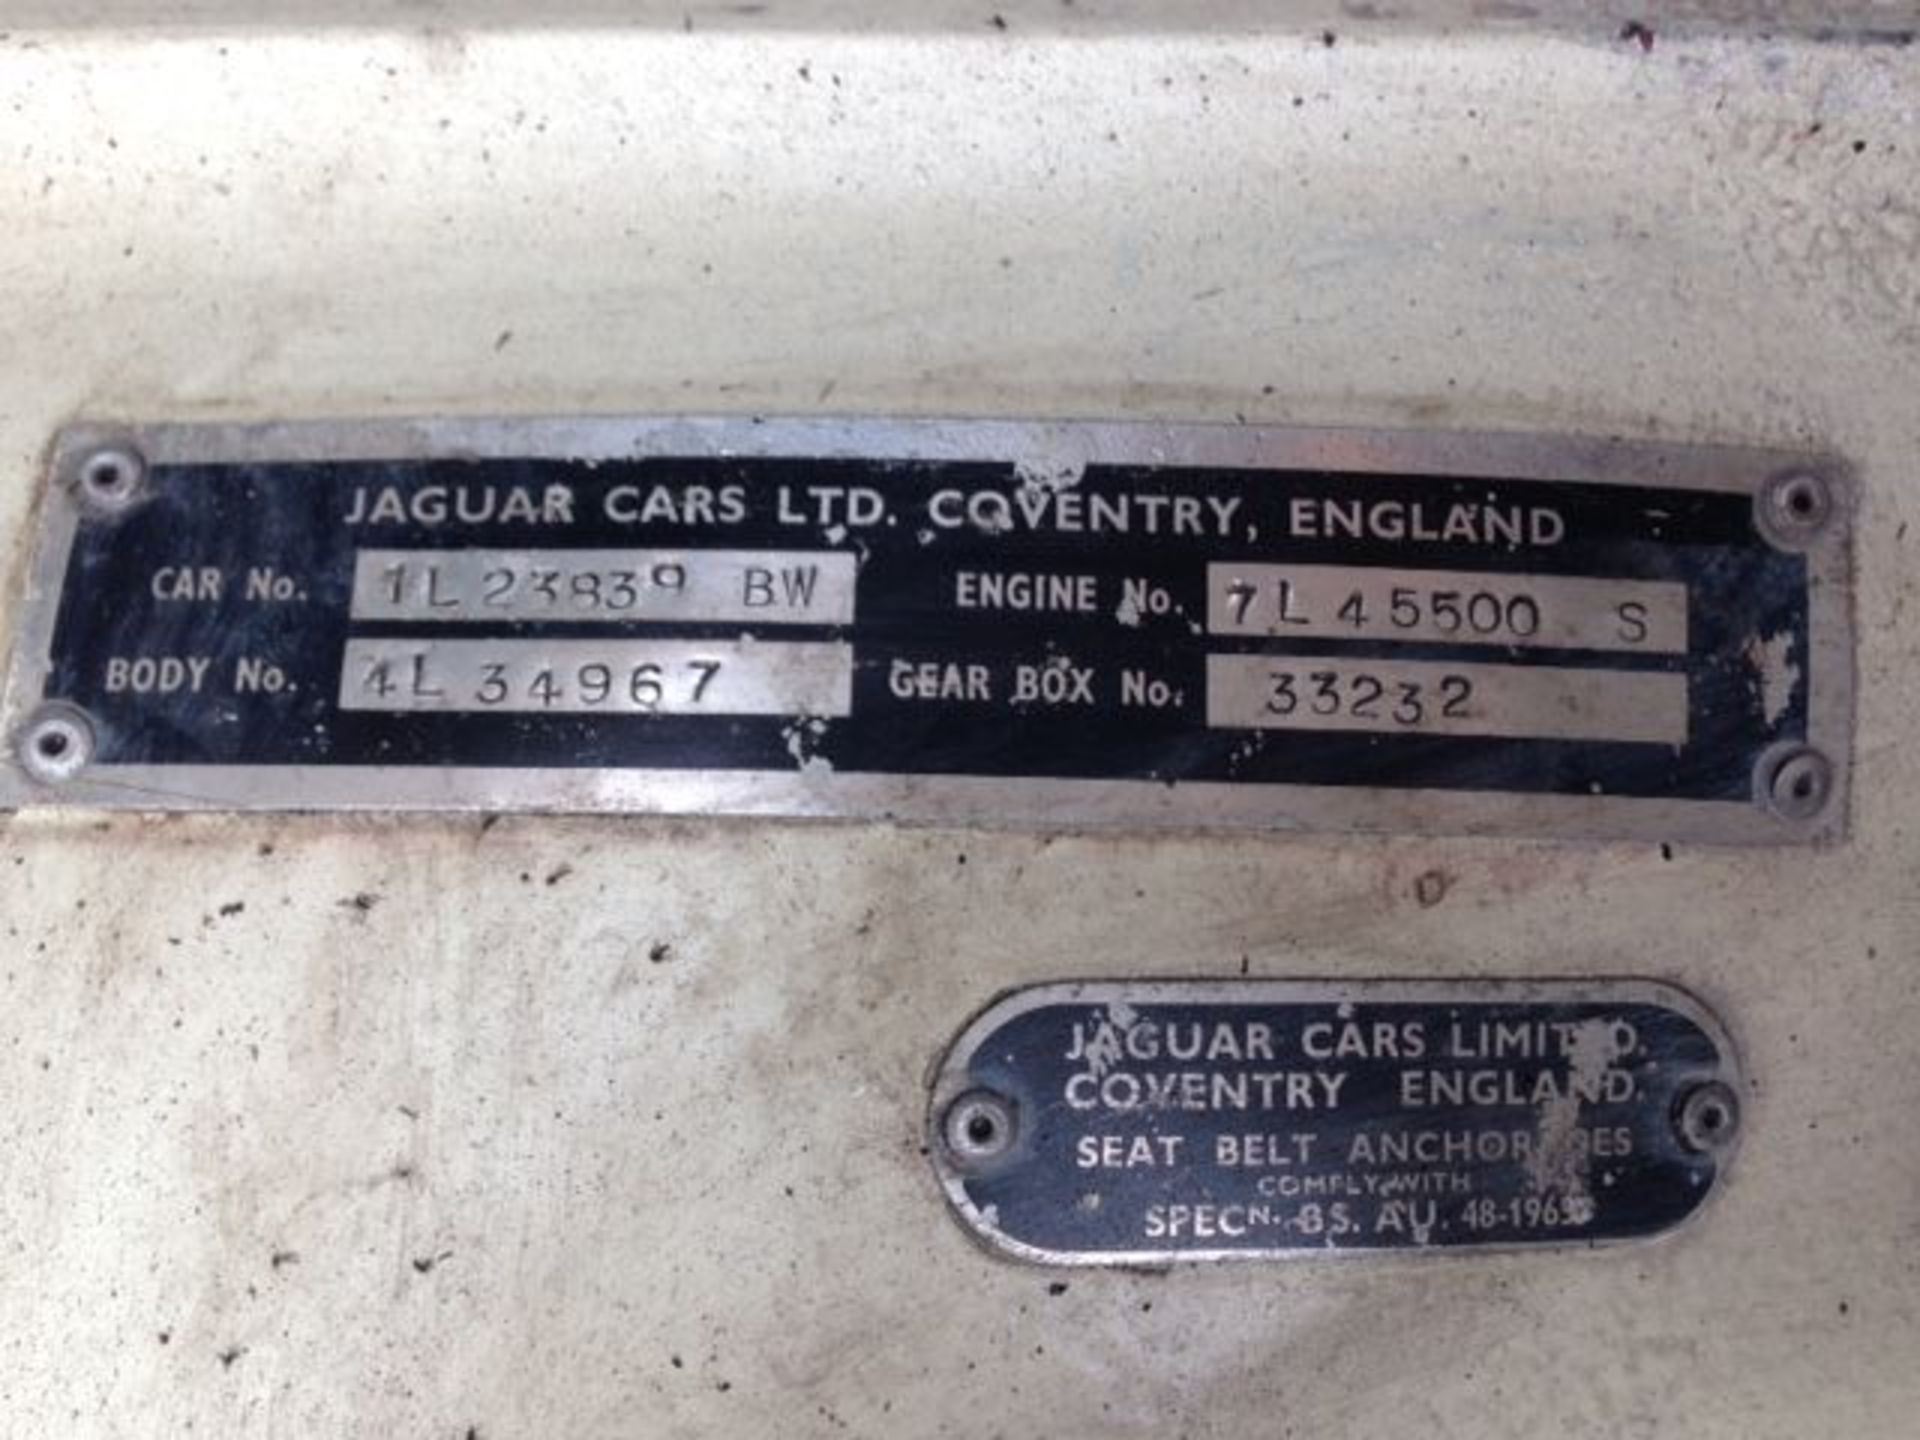 JAGUAR, XJ6 4.2 - 4235cc, Chassis number 1L23839BW - offered with a Northern Irish Vehicle Test - Image 13 of 14